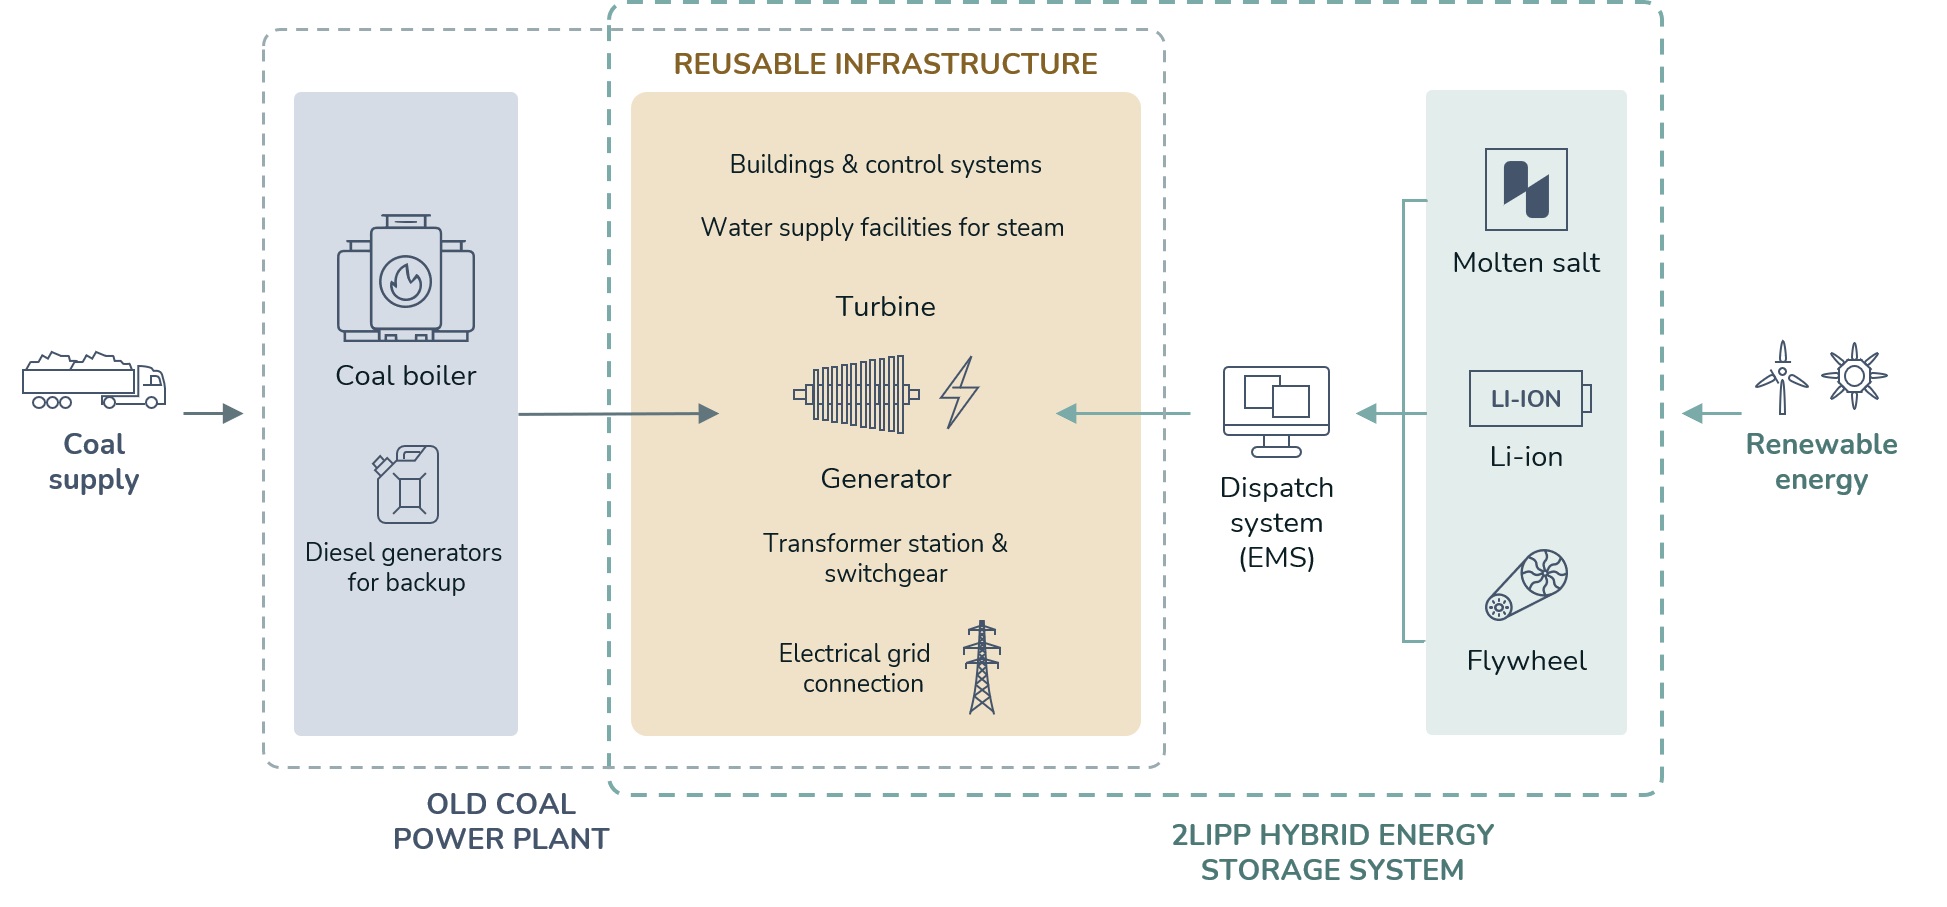 Concept for infrastructure reuse in old coal power plants